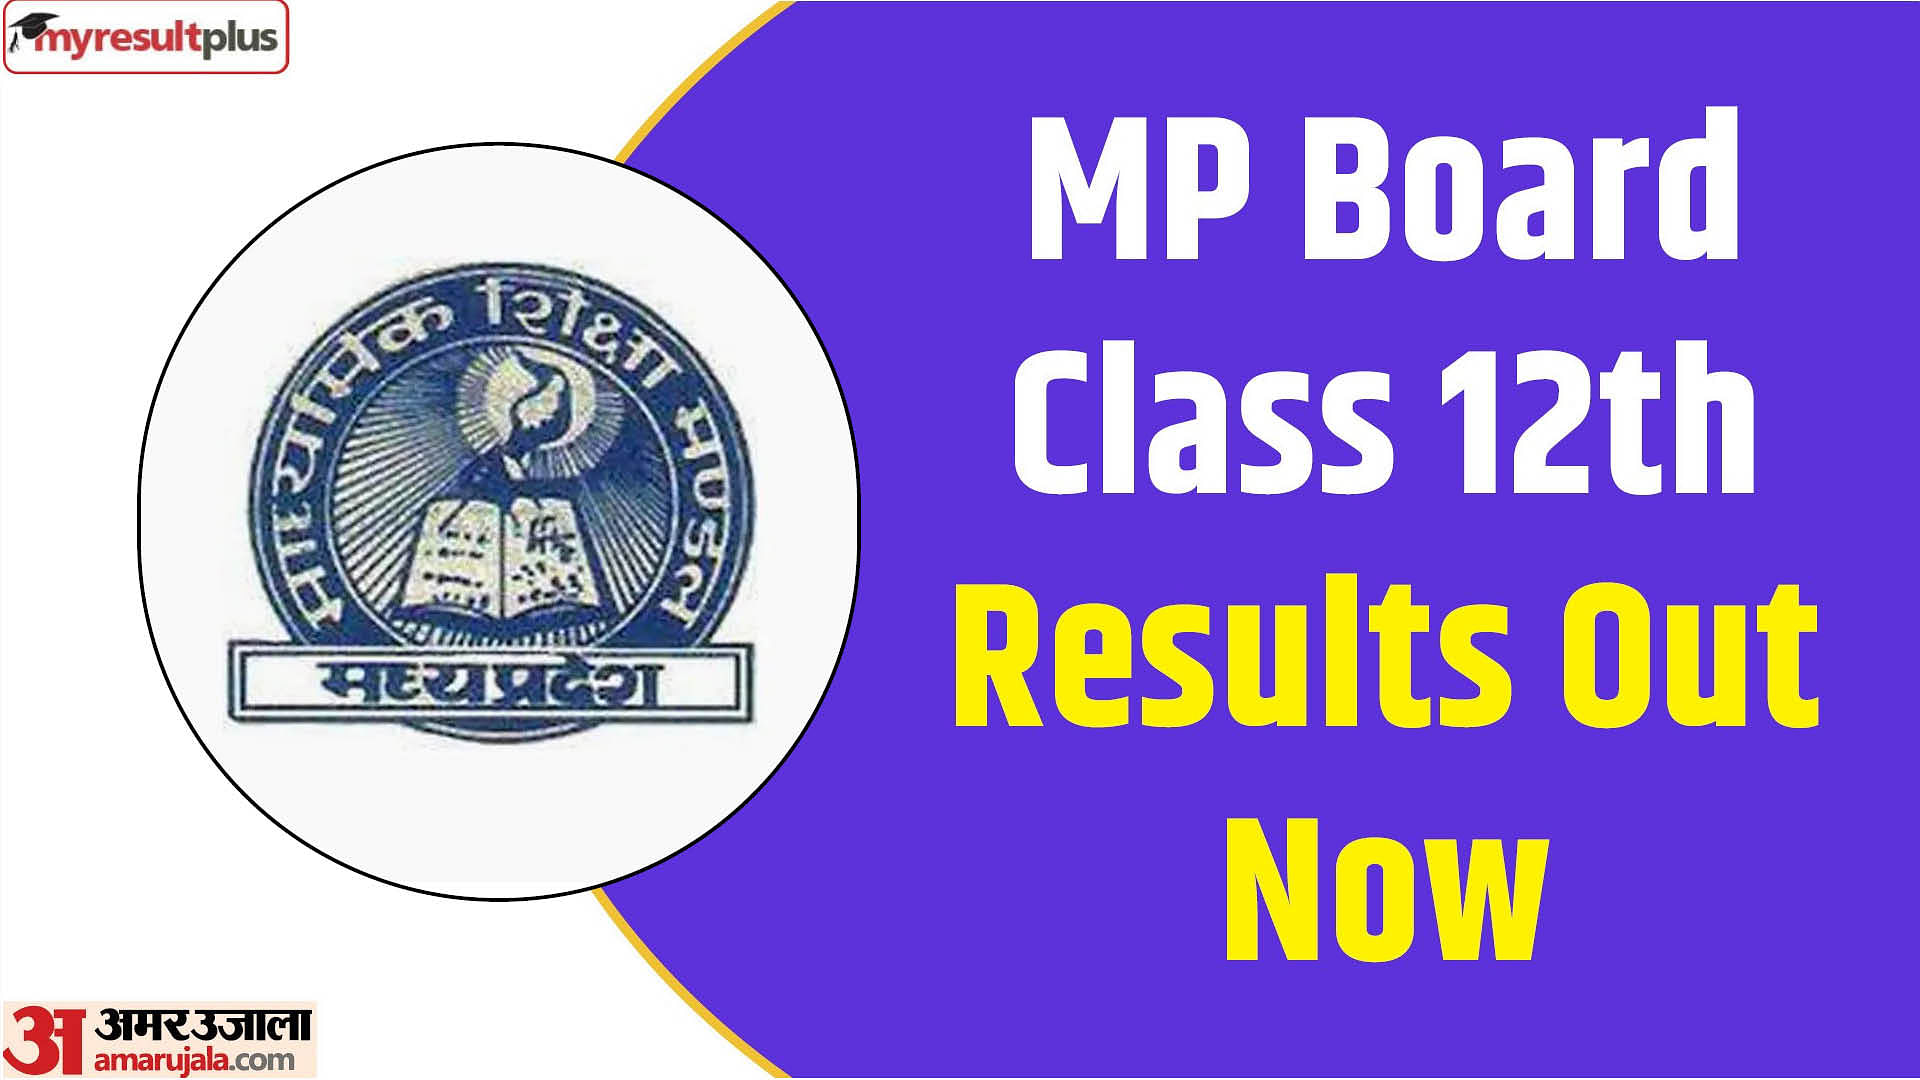 MP Board Class 12th Results declared today, Register here to get the scorecard directly on your phone